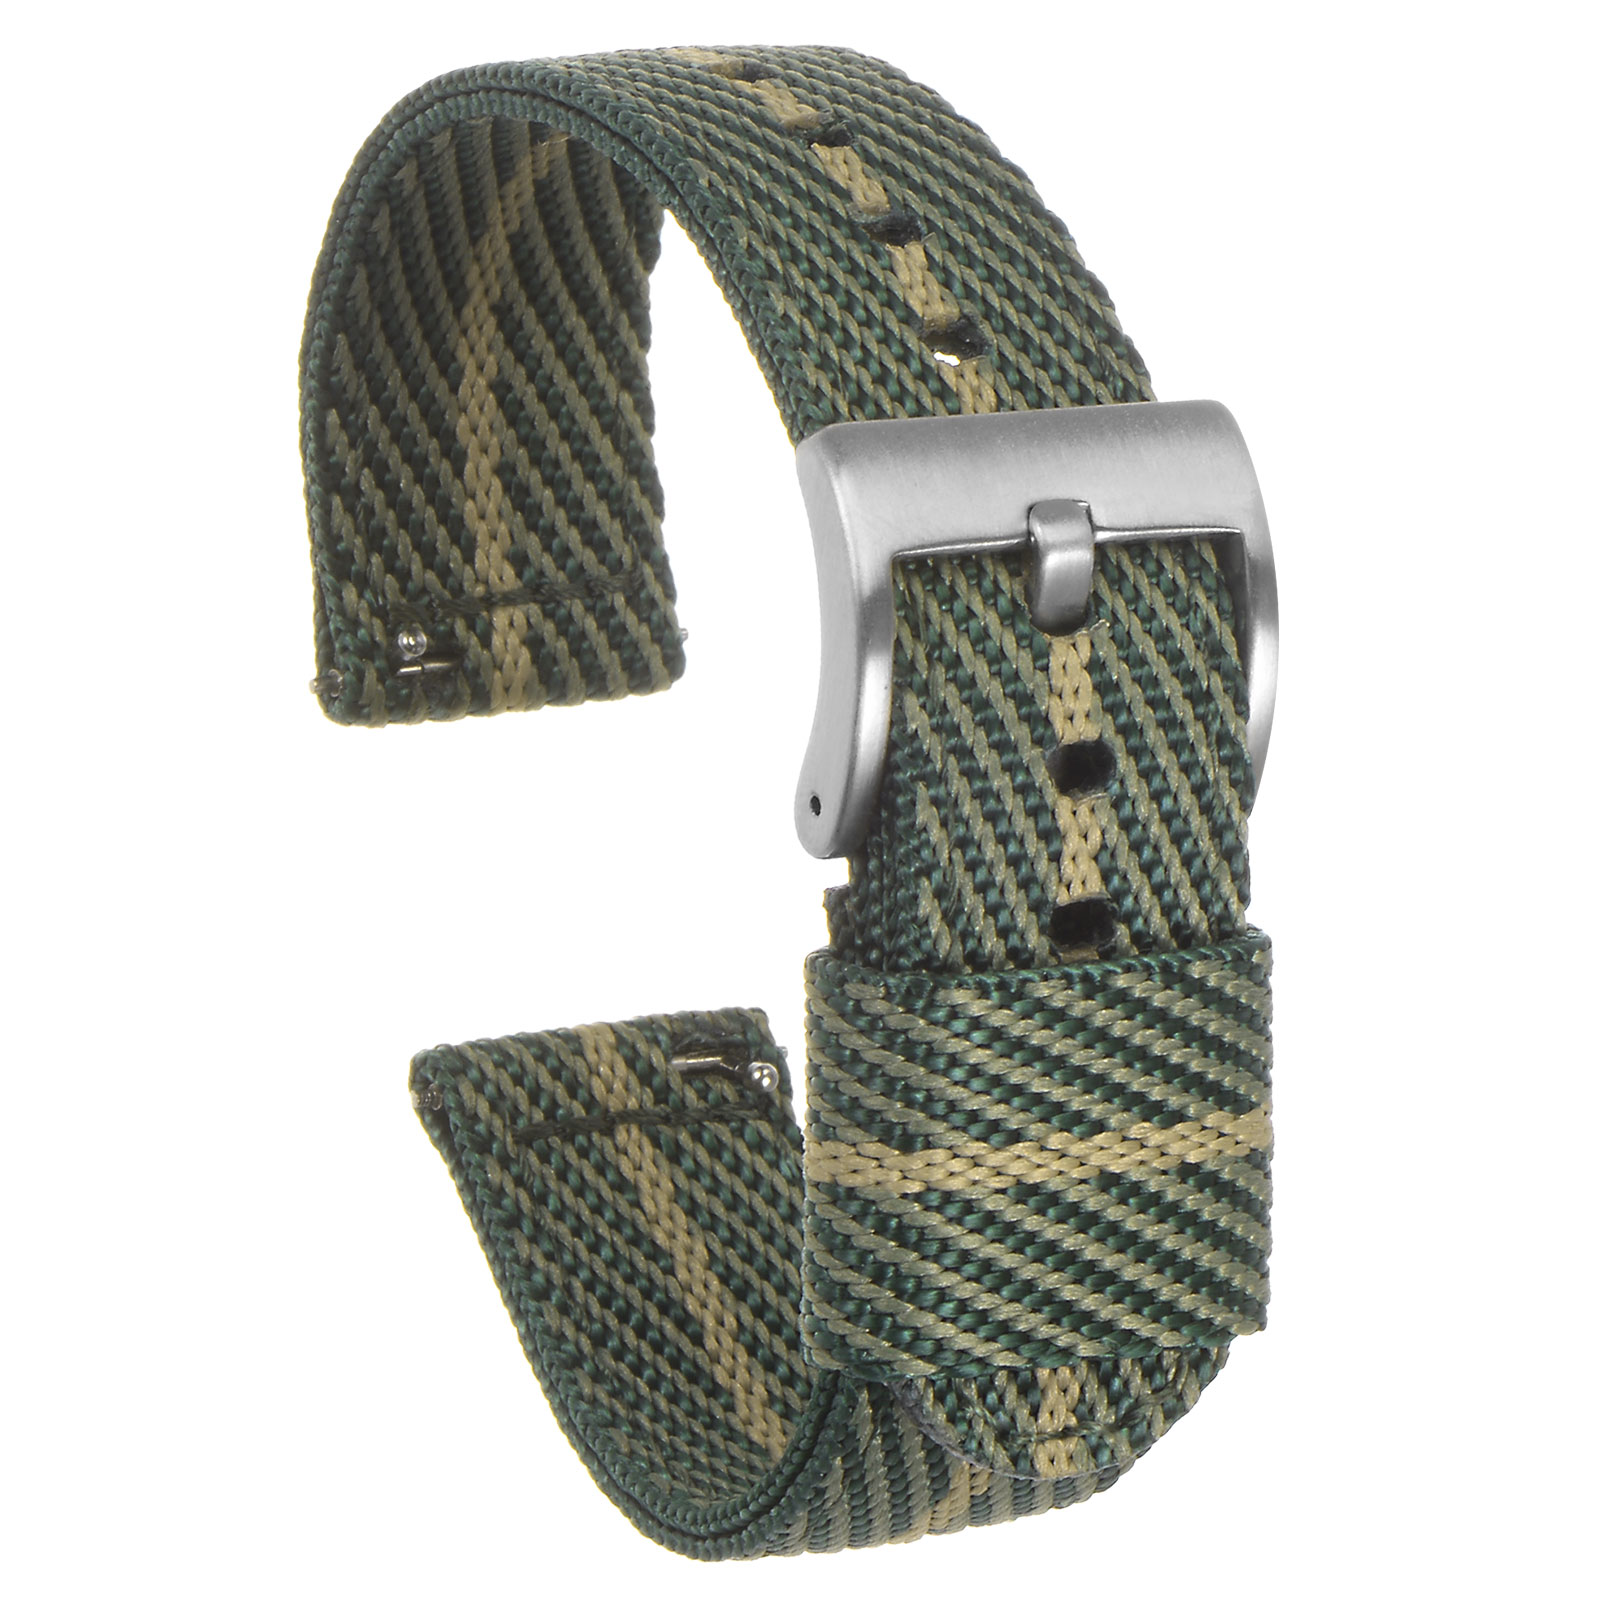 NewLife 24mm Khaki Nylon Fabric Watch Strap | Heavy Duty, Military Style  Replacement Wrist Band with Stainless Steel Buckle for Men and Women - Khaki